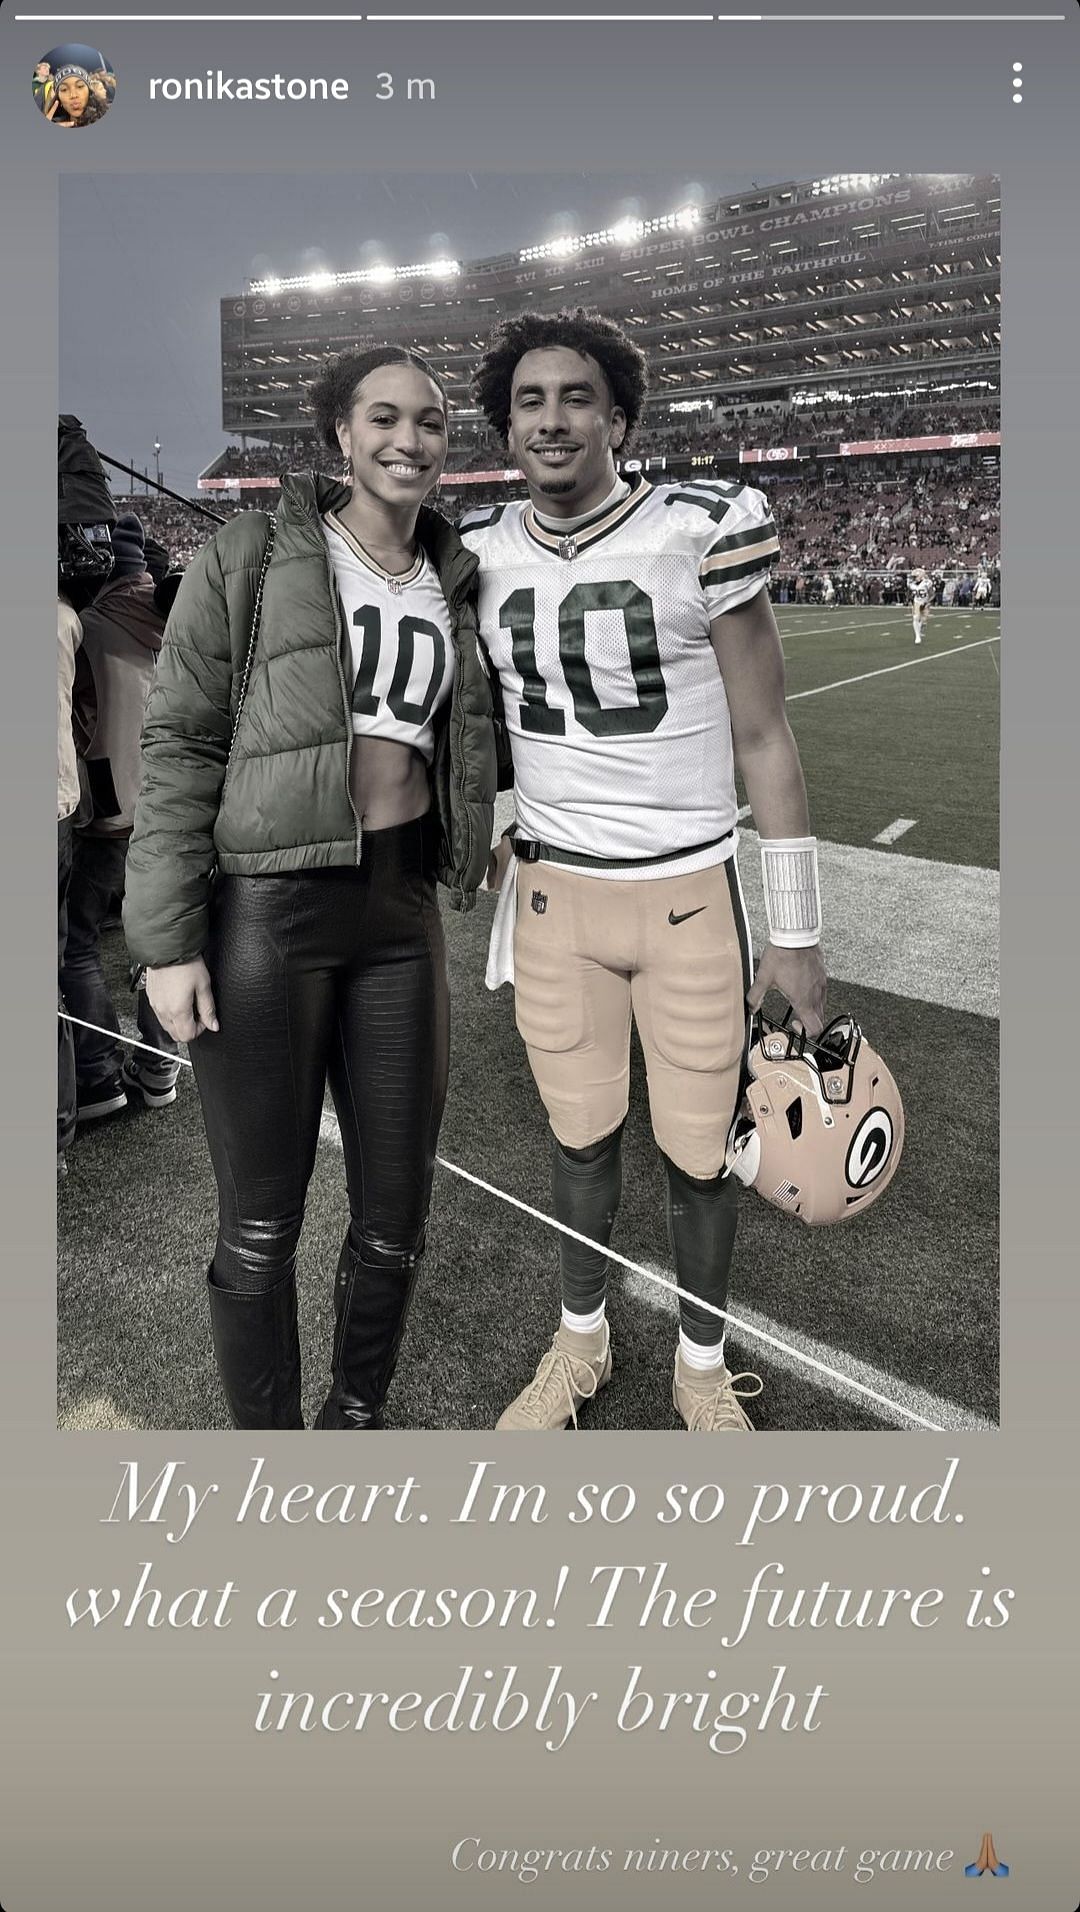 Ronika Stone's heartfelt message for her boyfriend after Packers lose 21-24 to the 49ers